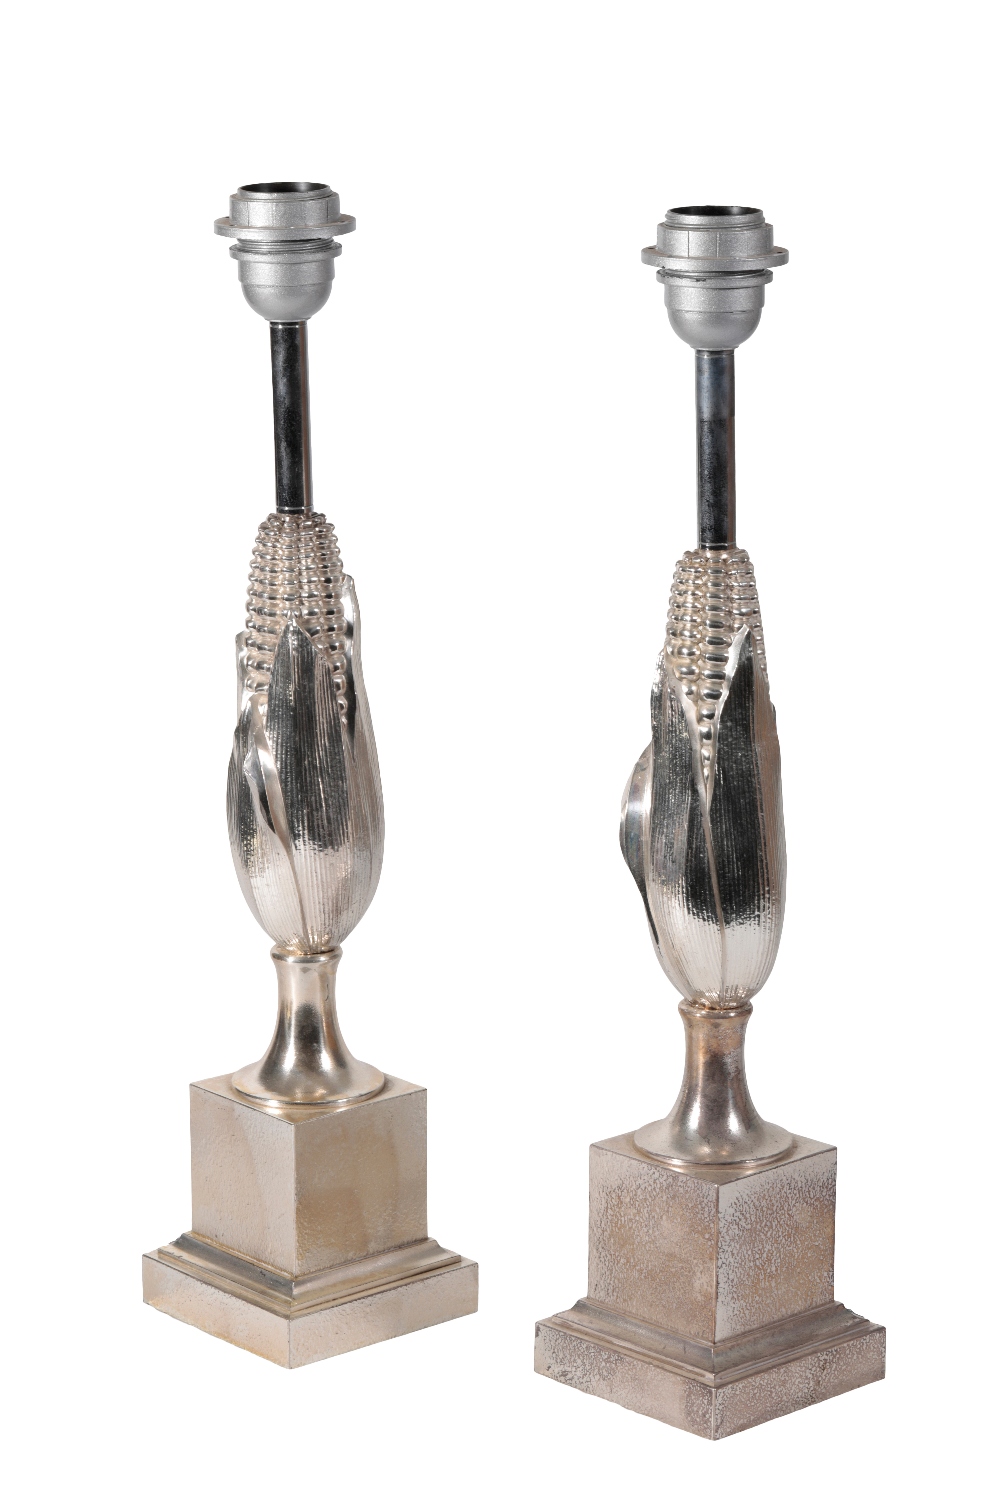 MAISON CHARLES: A PAIR OF SILVERED EPIS DE MAIZE" TABLE LAMPS"